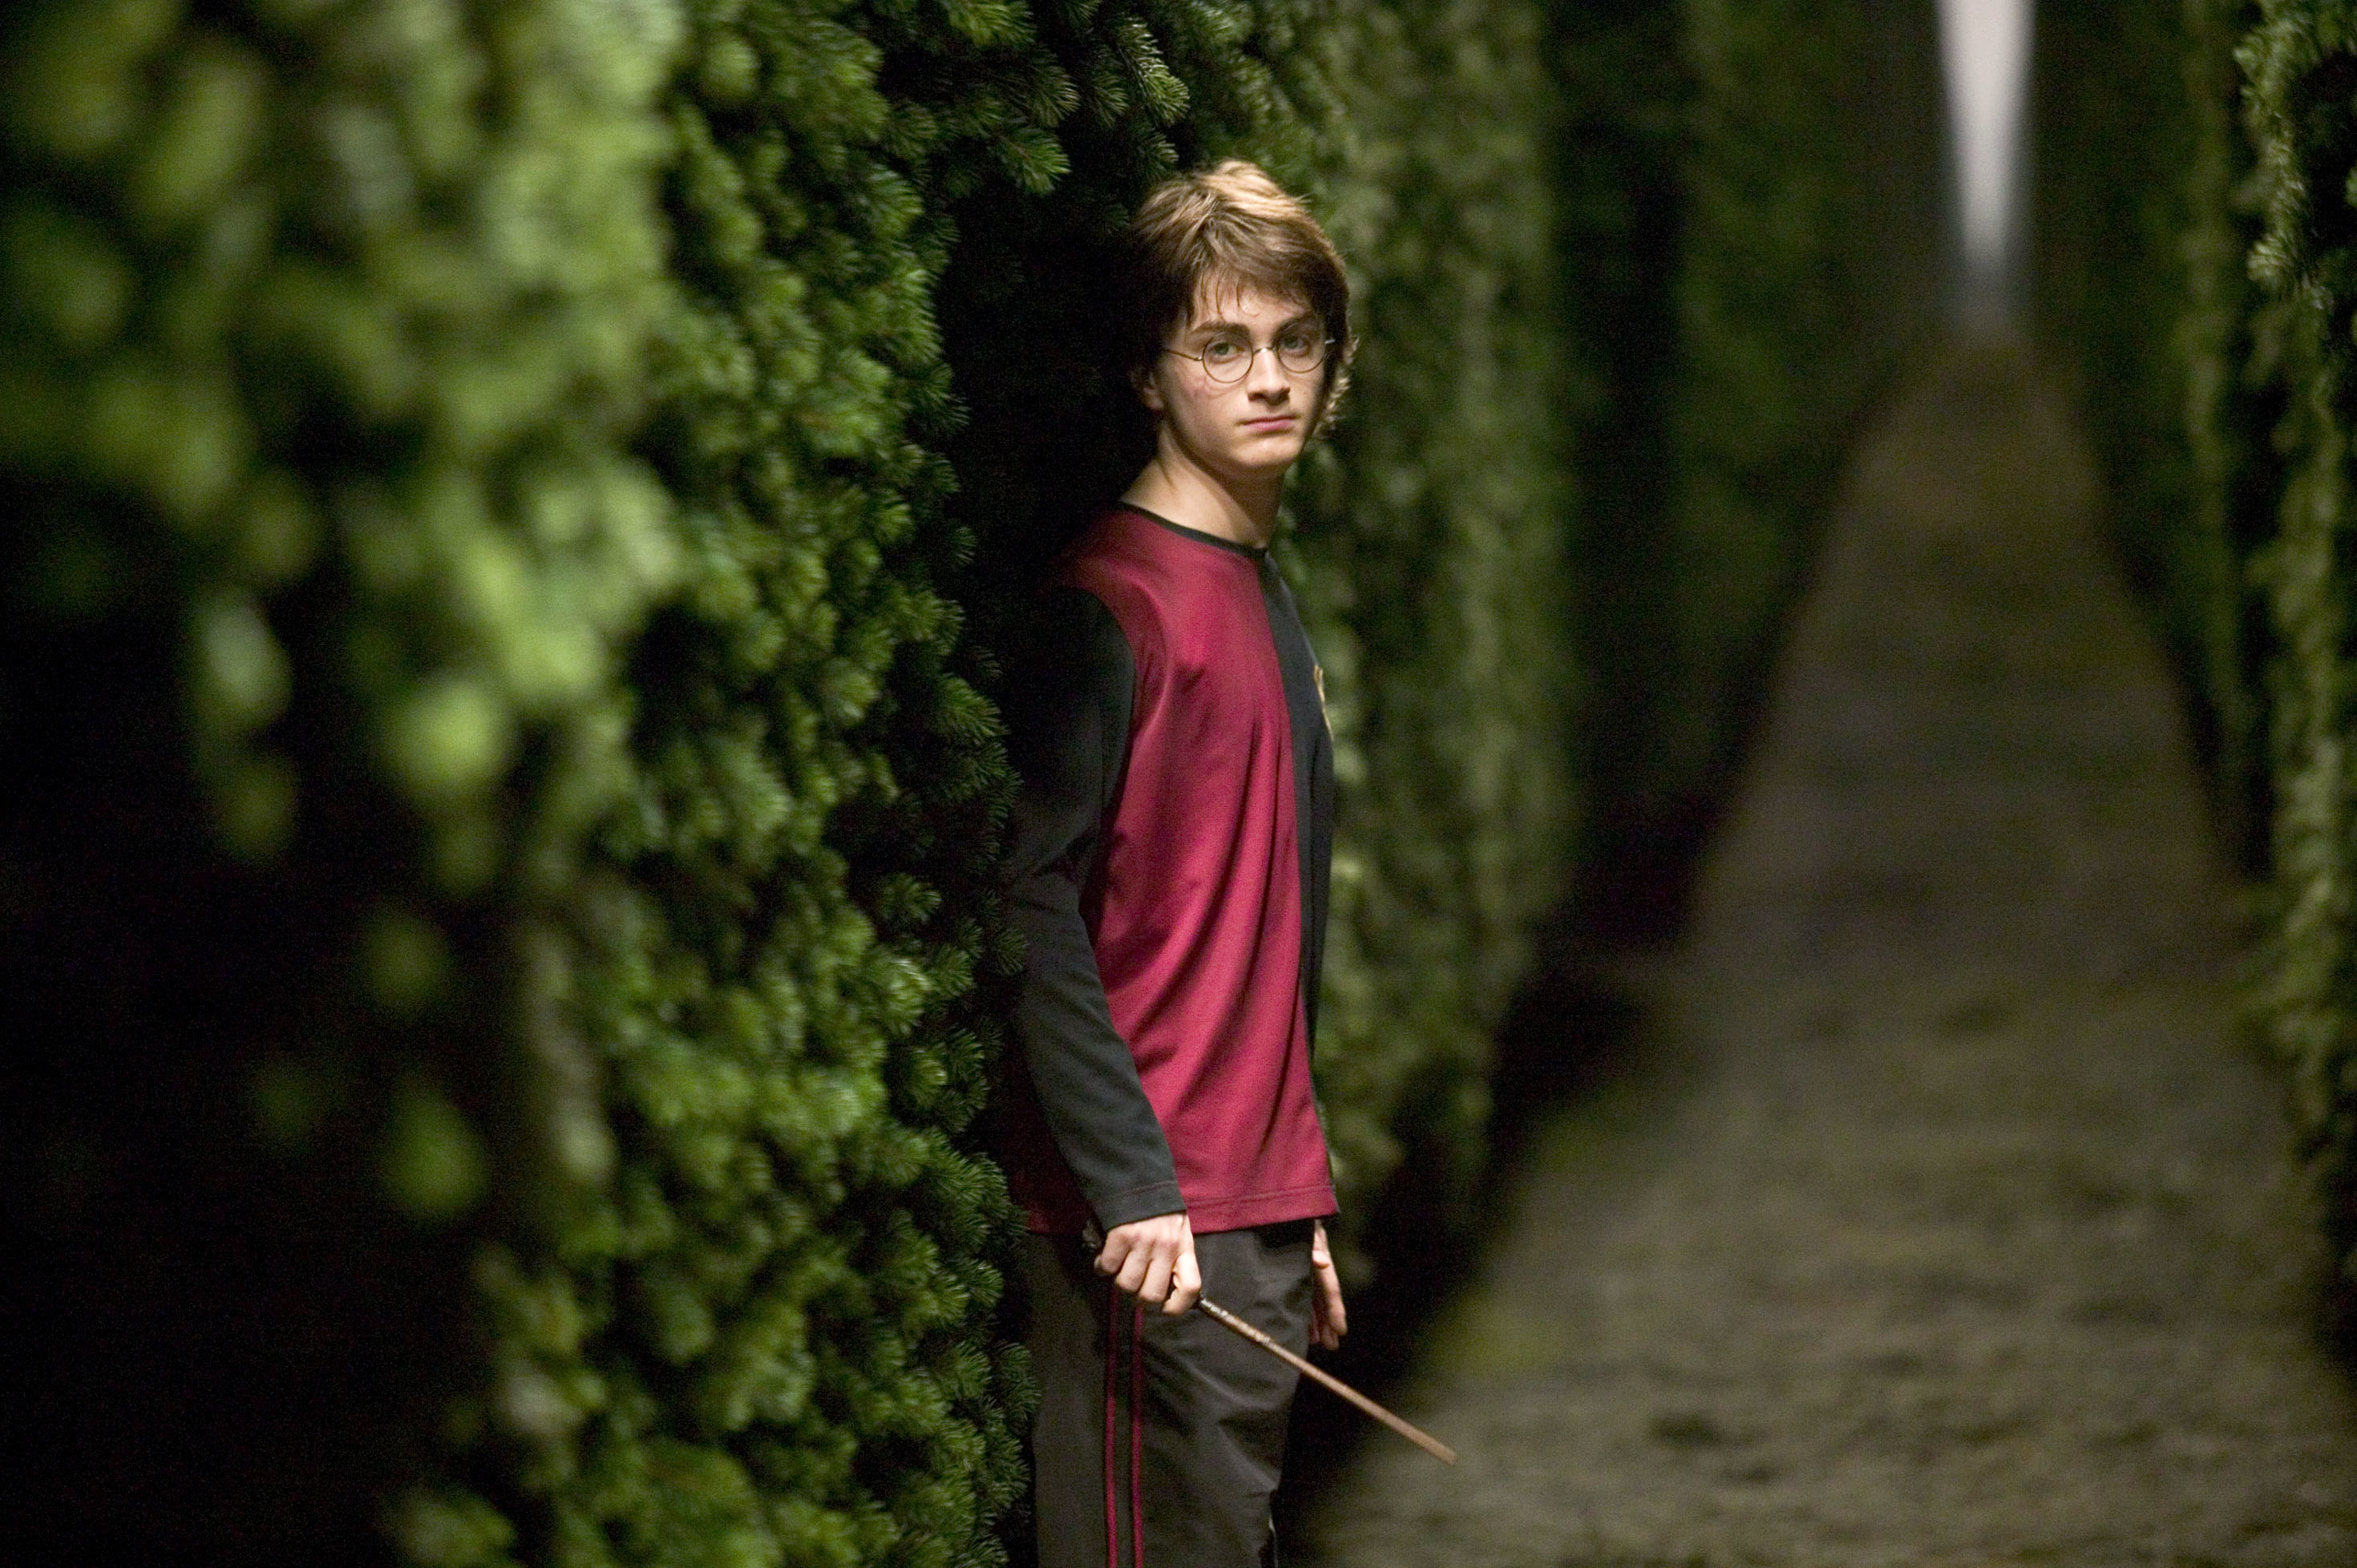 harry potter outside holding his wand